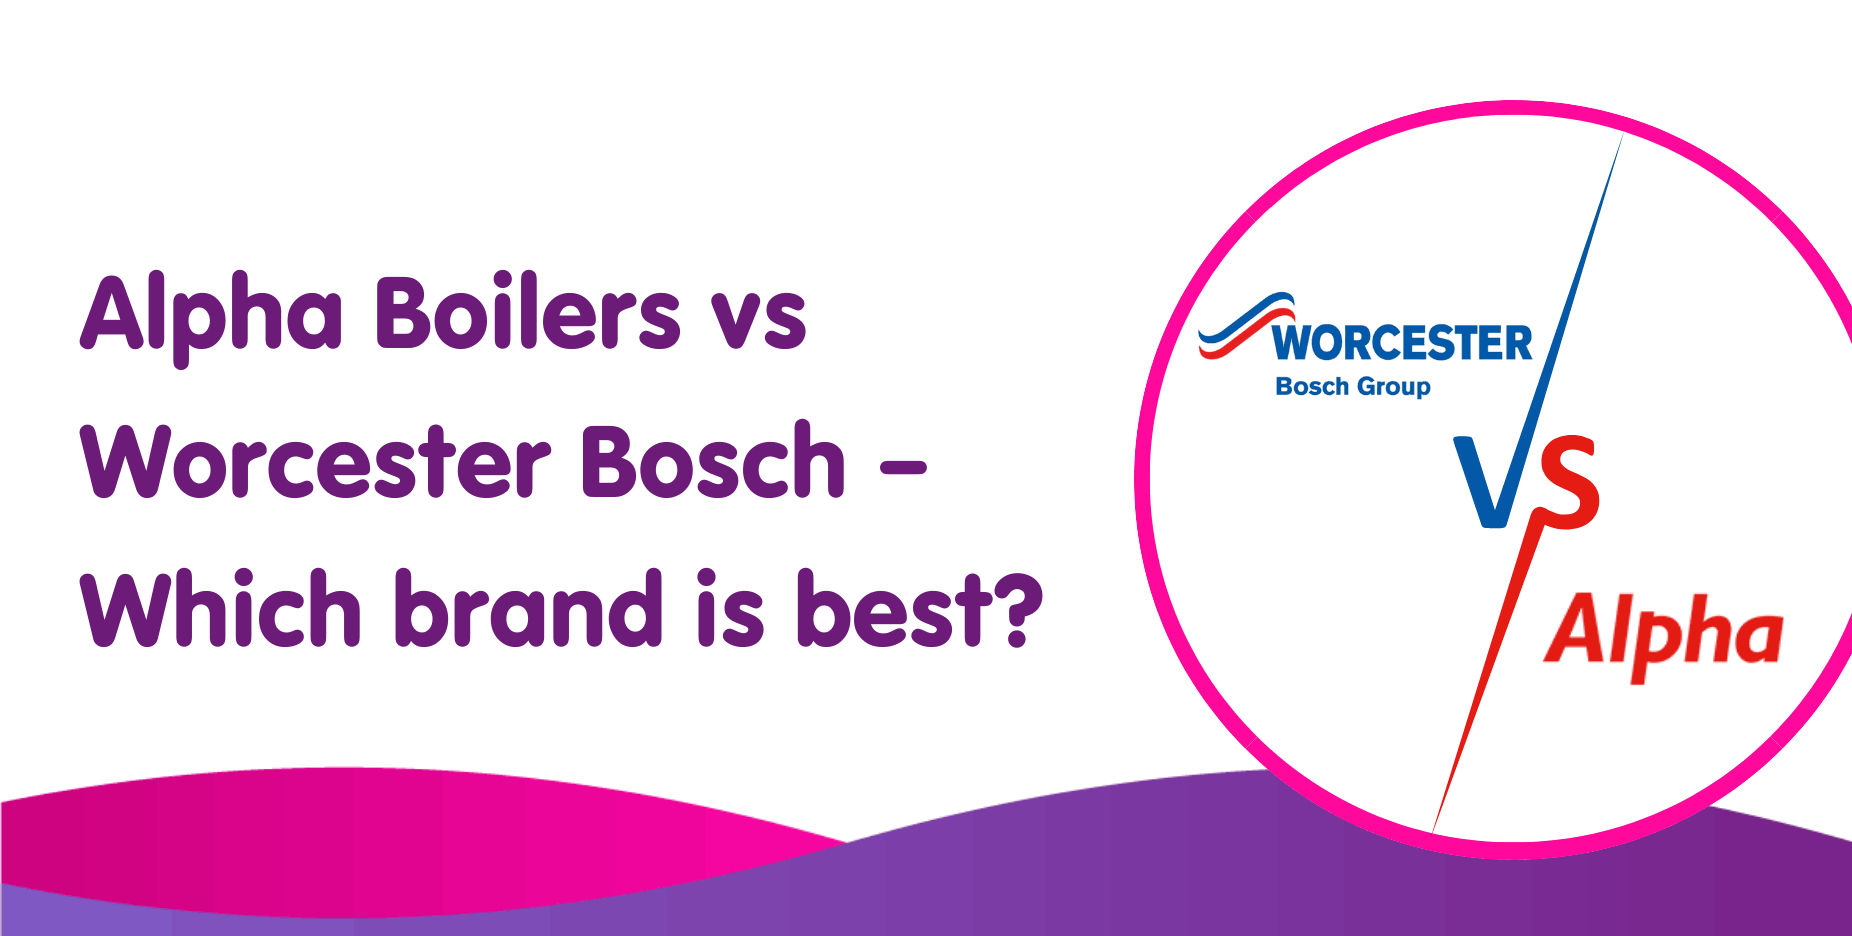 Alpha Boilers vs Worcester Bosch – Which brand is best?